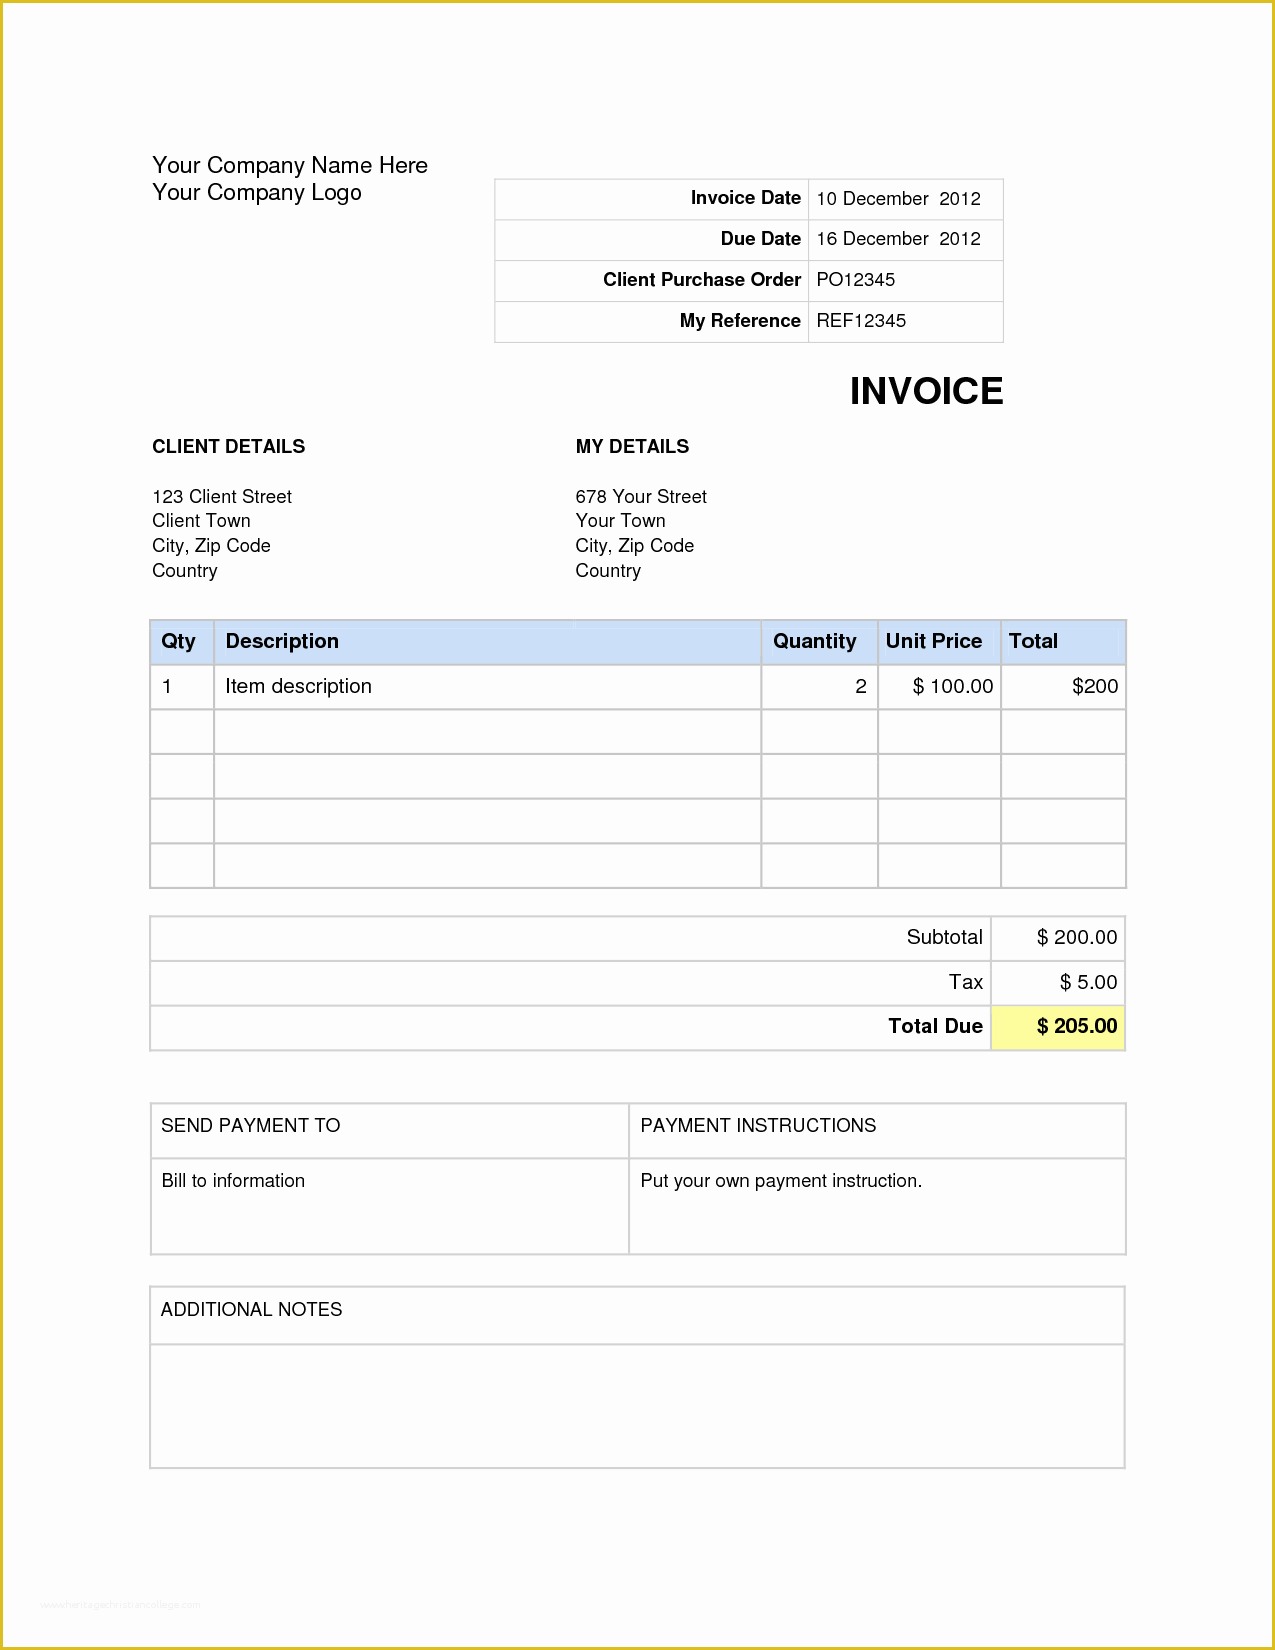 Microsoft Invoice Template Free Download Of Microsoft Word Invoice Template Free Download